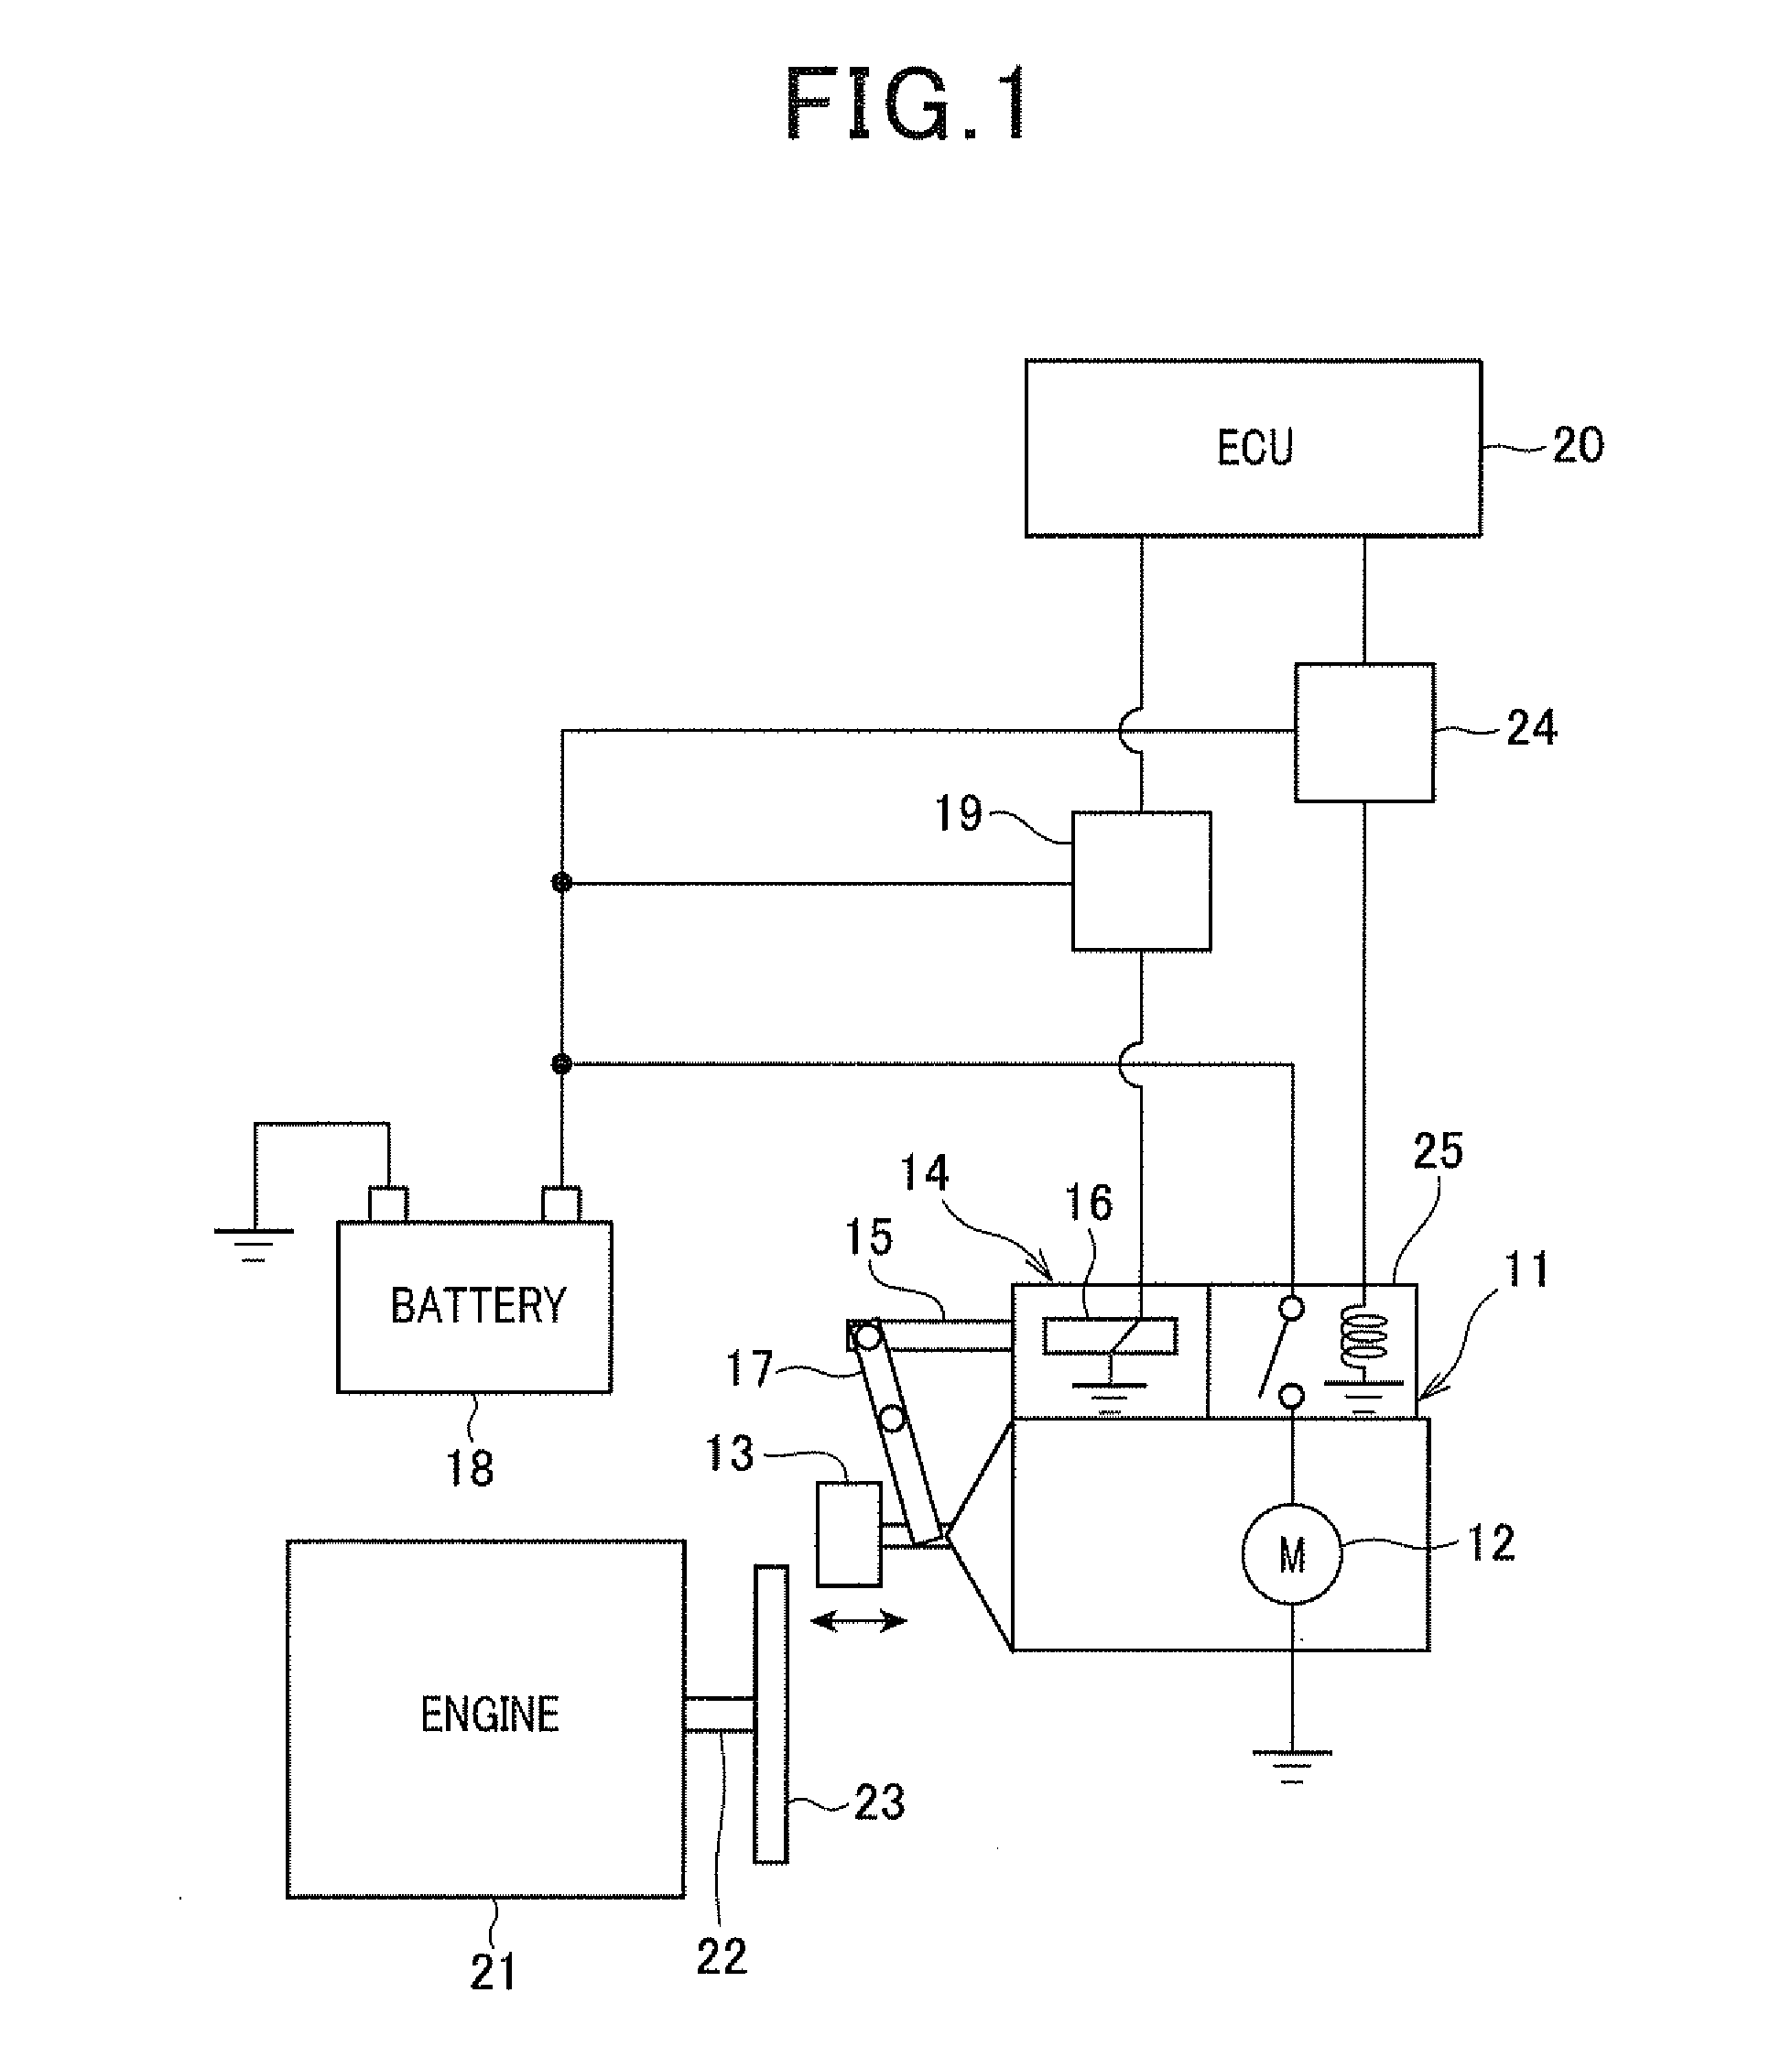 Control device for controlling automatic engine stop and start